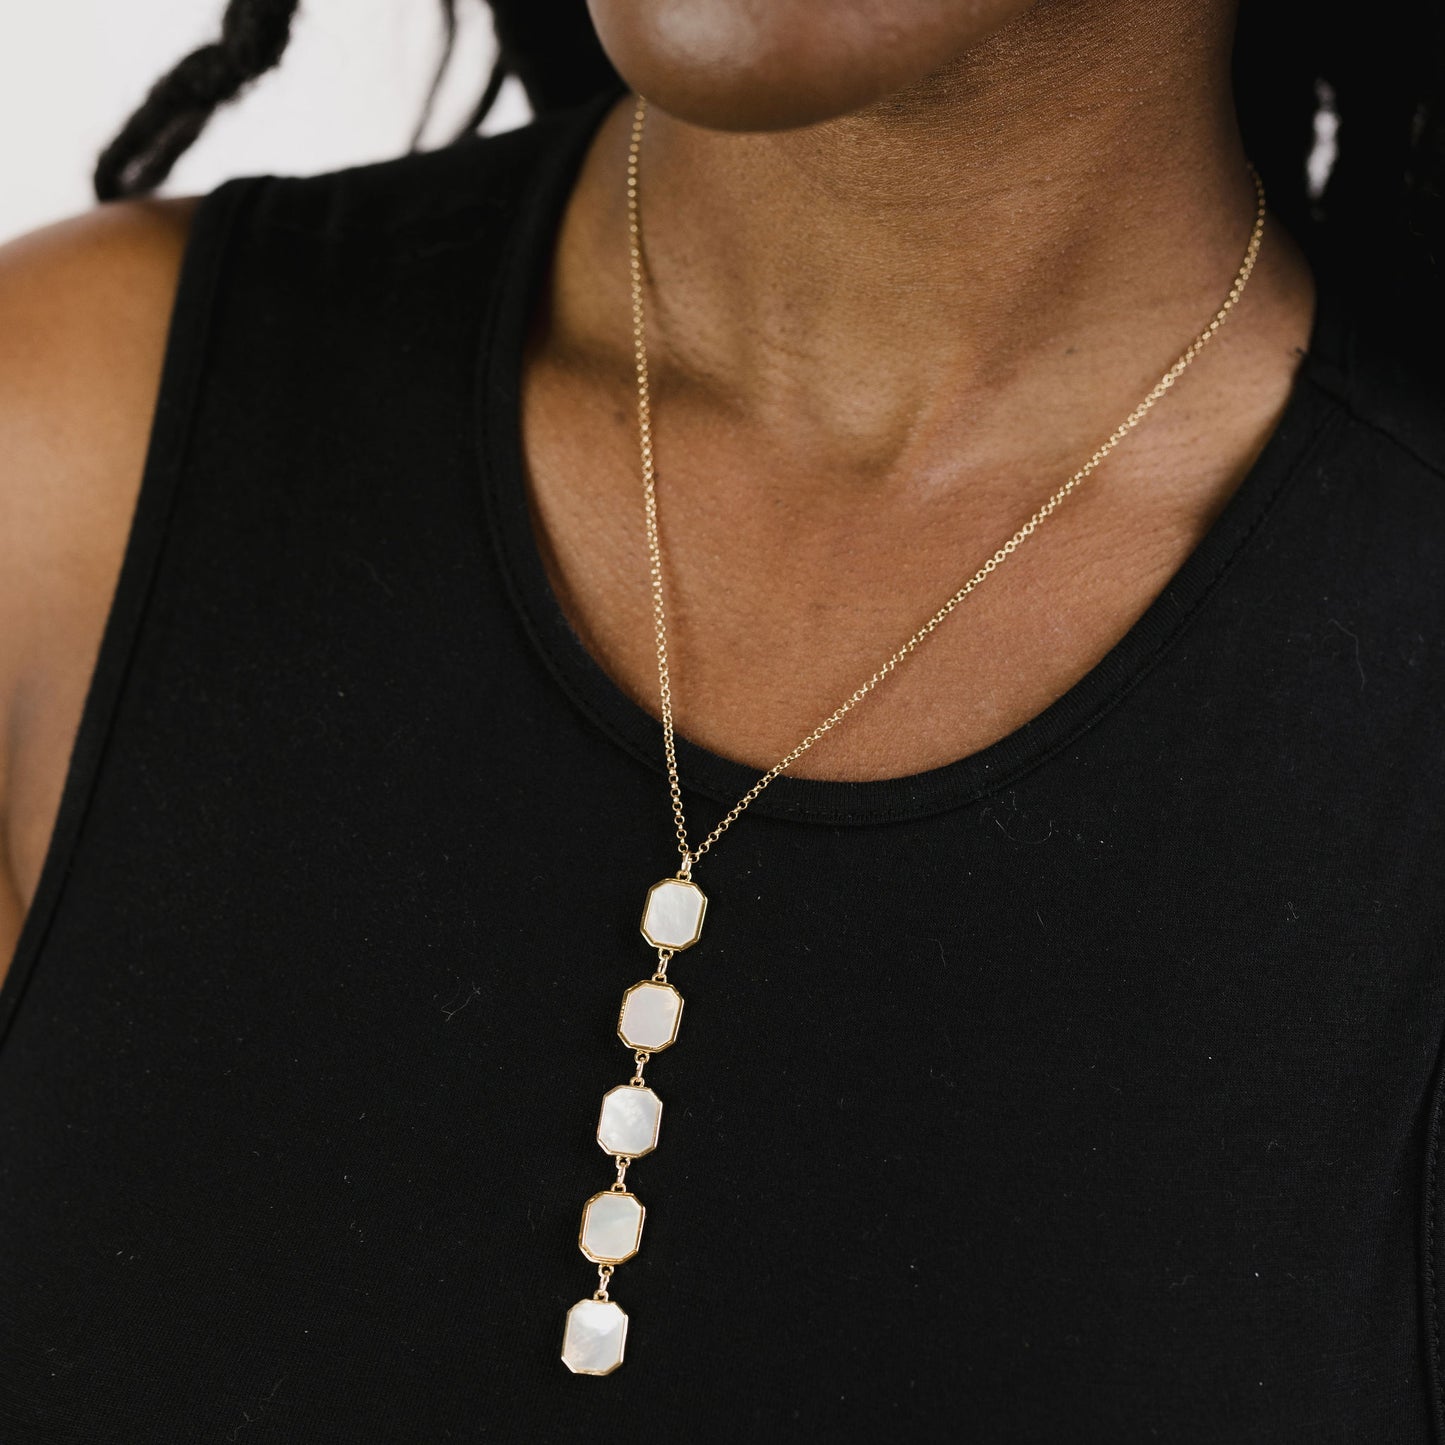 Mother of pearl drop necklace on model